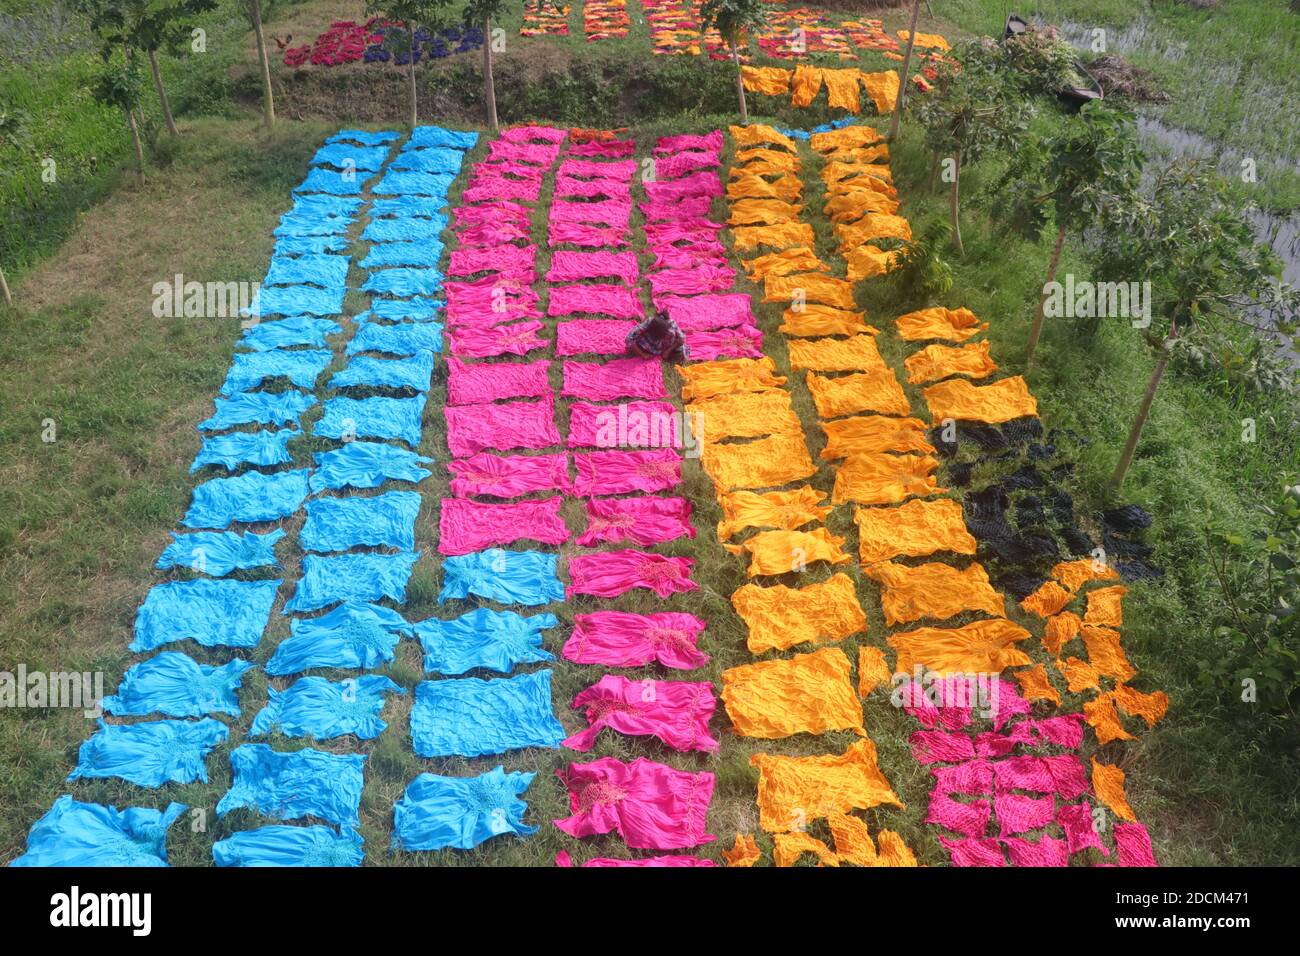 Bangladeshi workers collect fabric after dry them under the sun at a dyeing factory in Narayanganj, Bangladesh. Nazmul Islam/Alamy Stock Photo Stock Photo